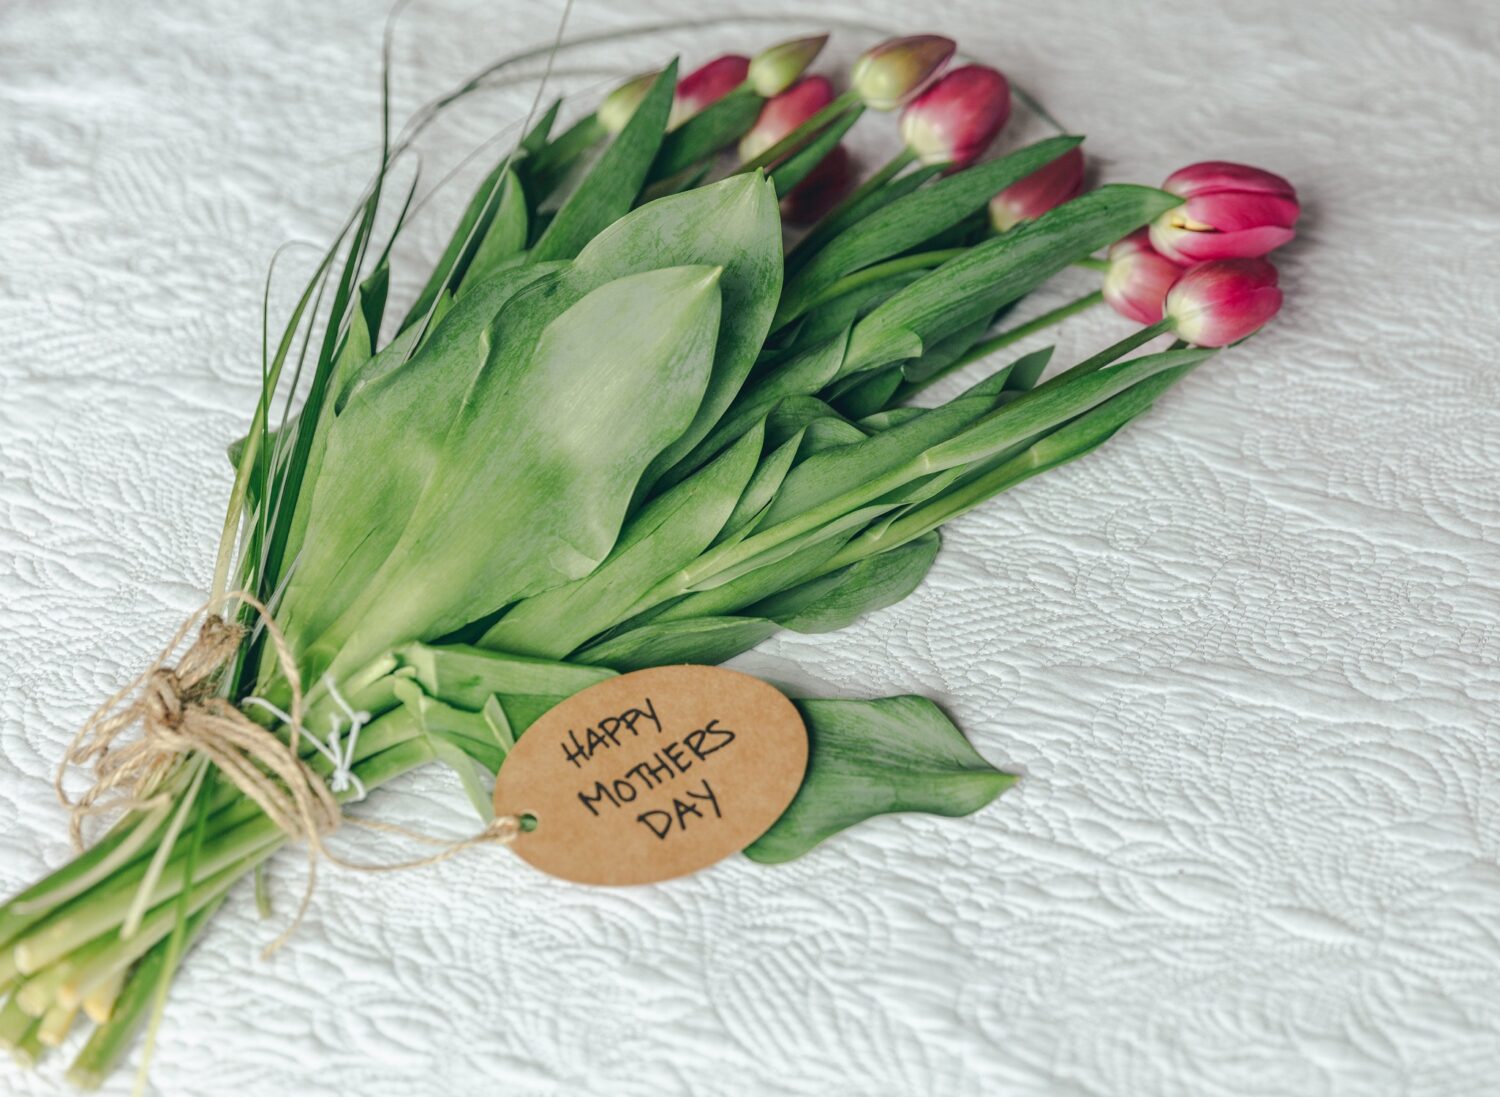 Tulip flowers with happy mothers day card.